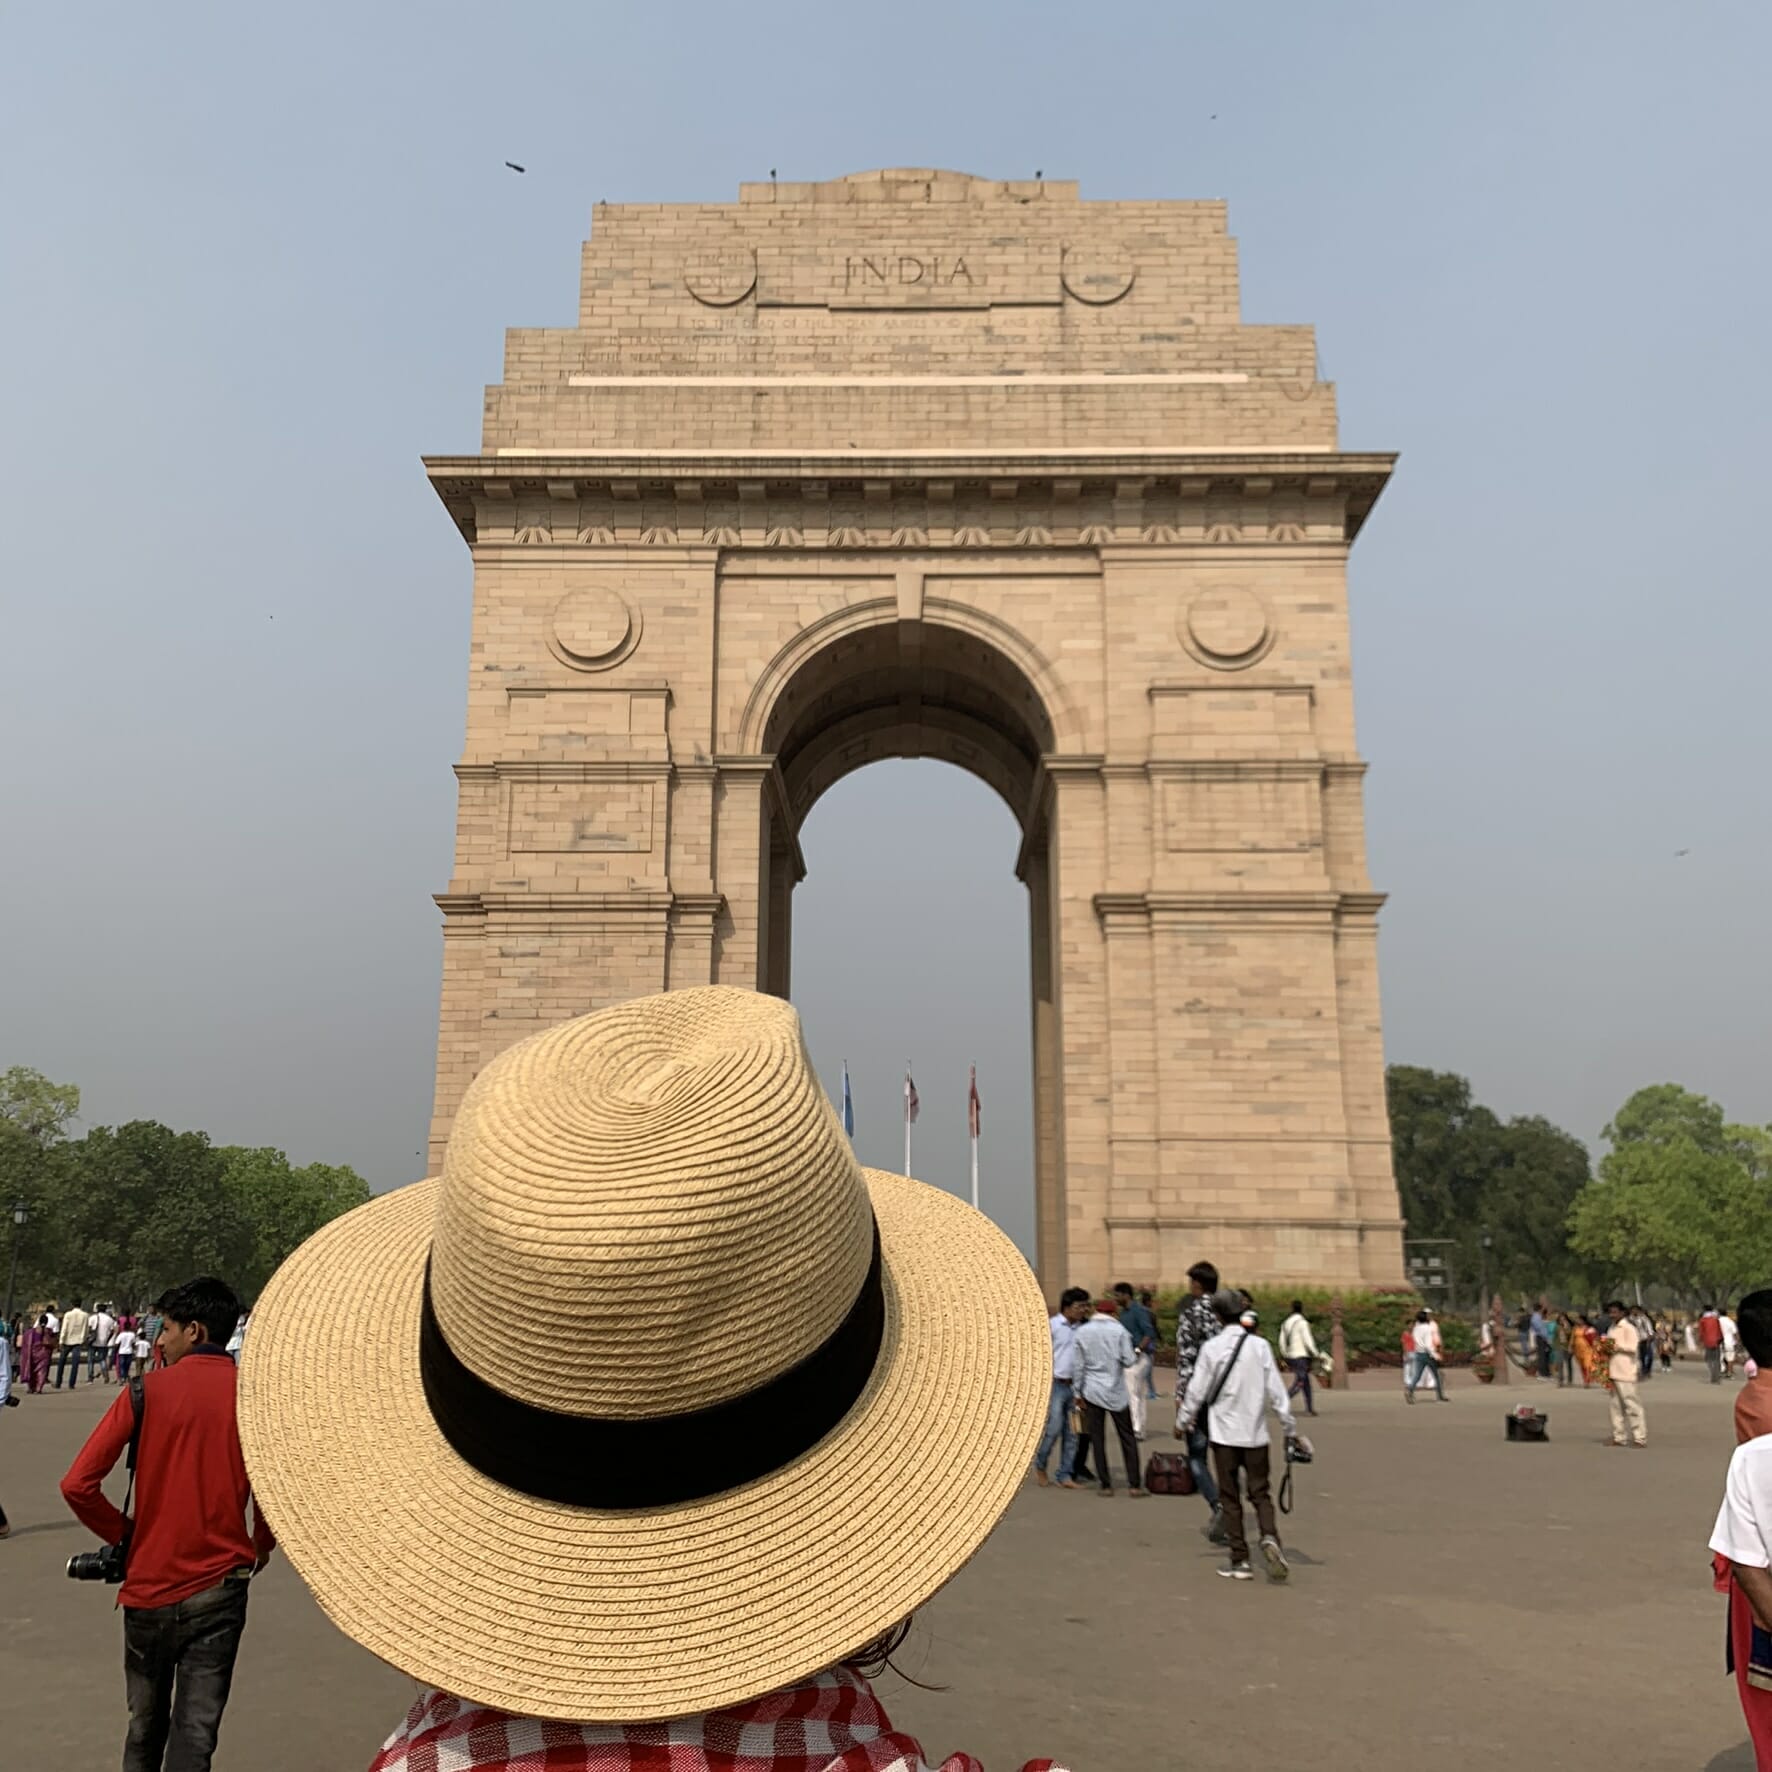 Boy posing in front of India gate - PixaHive